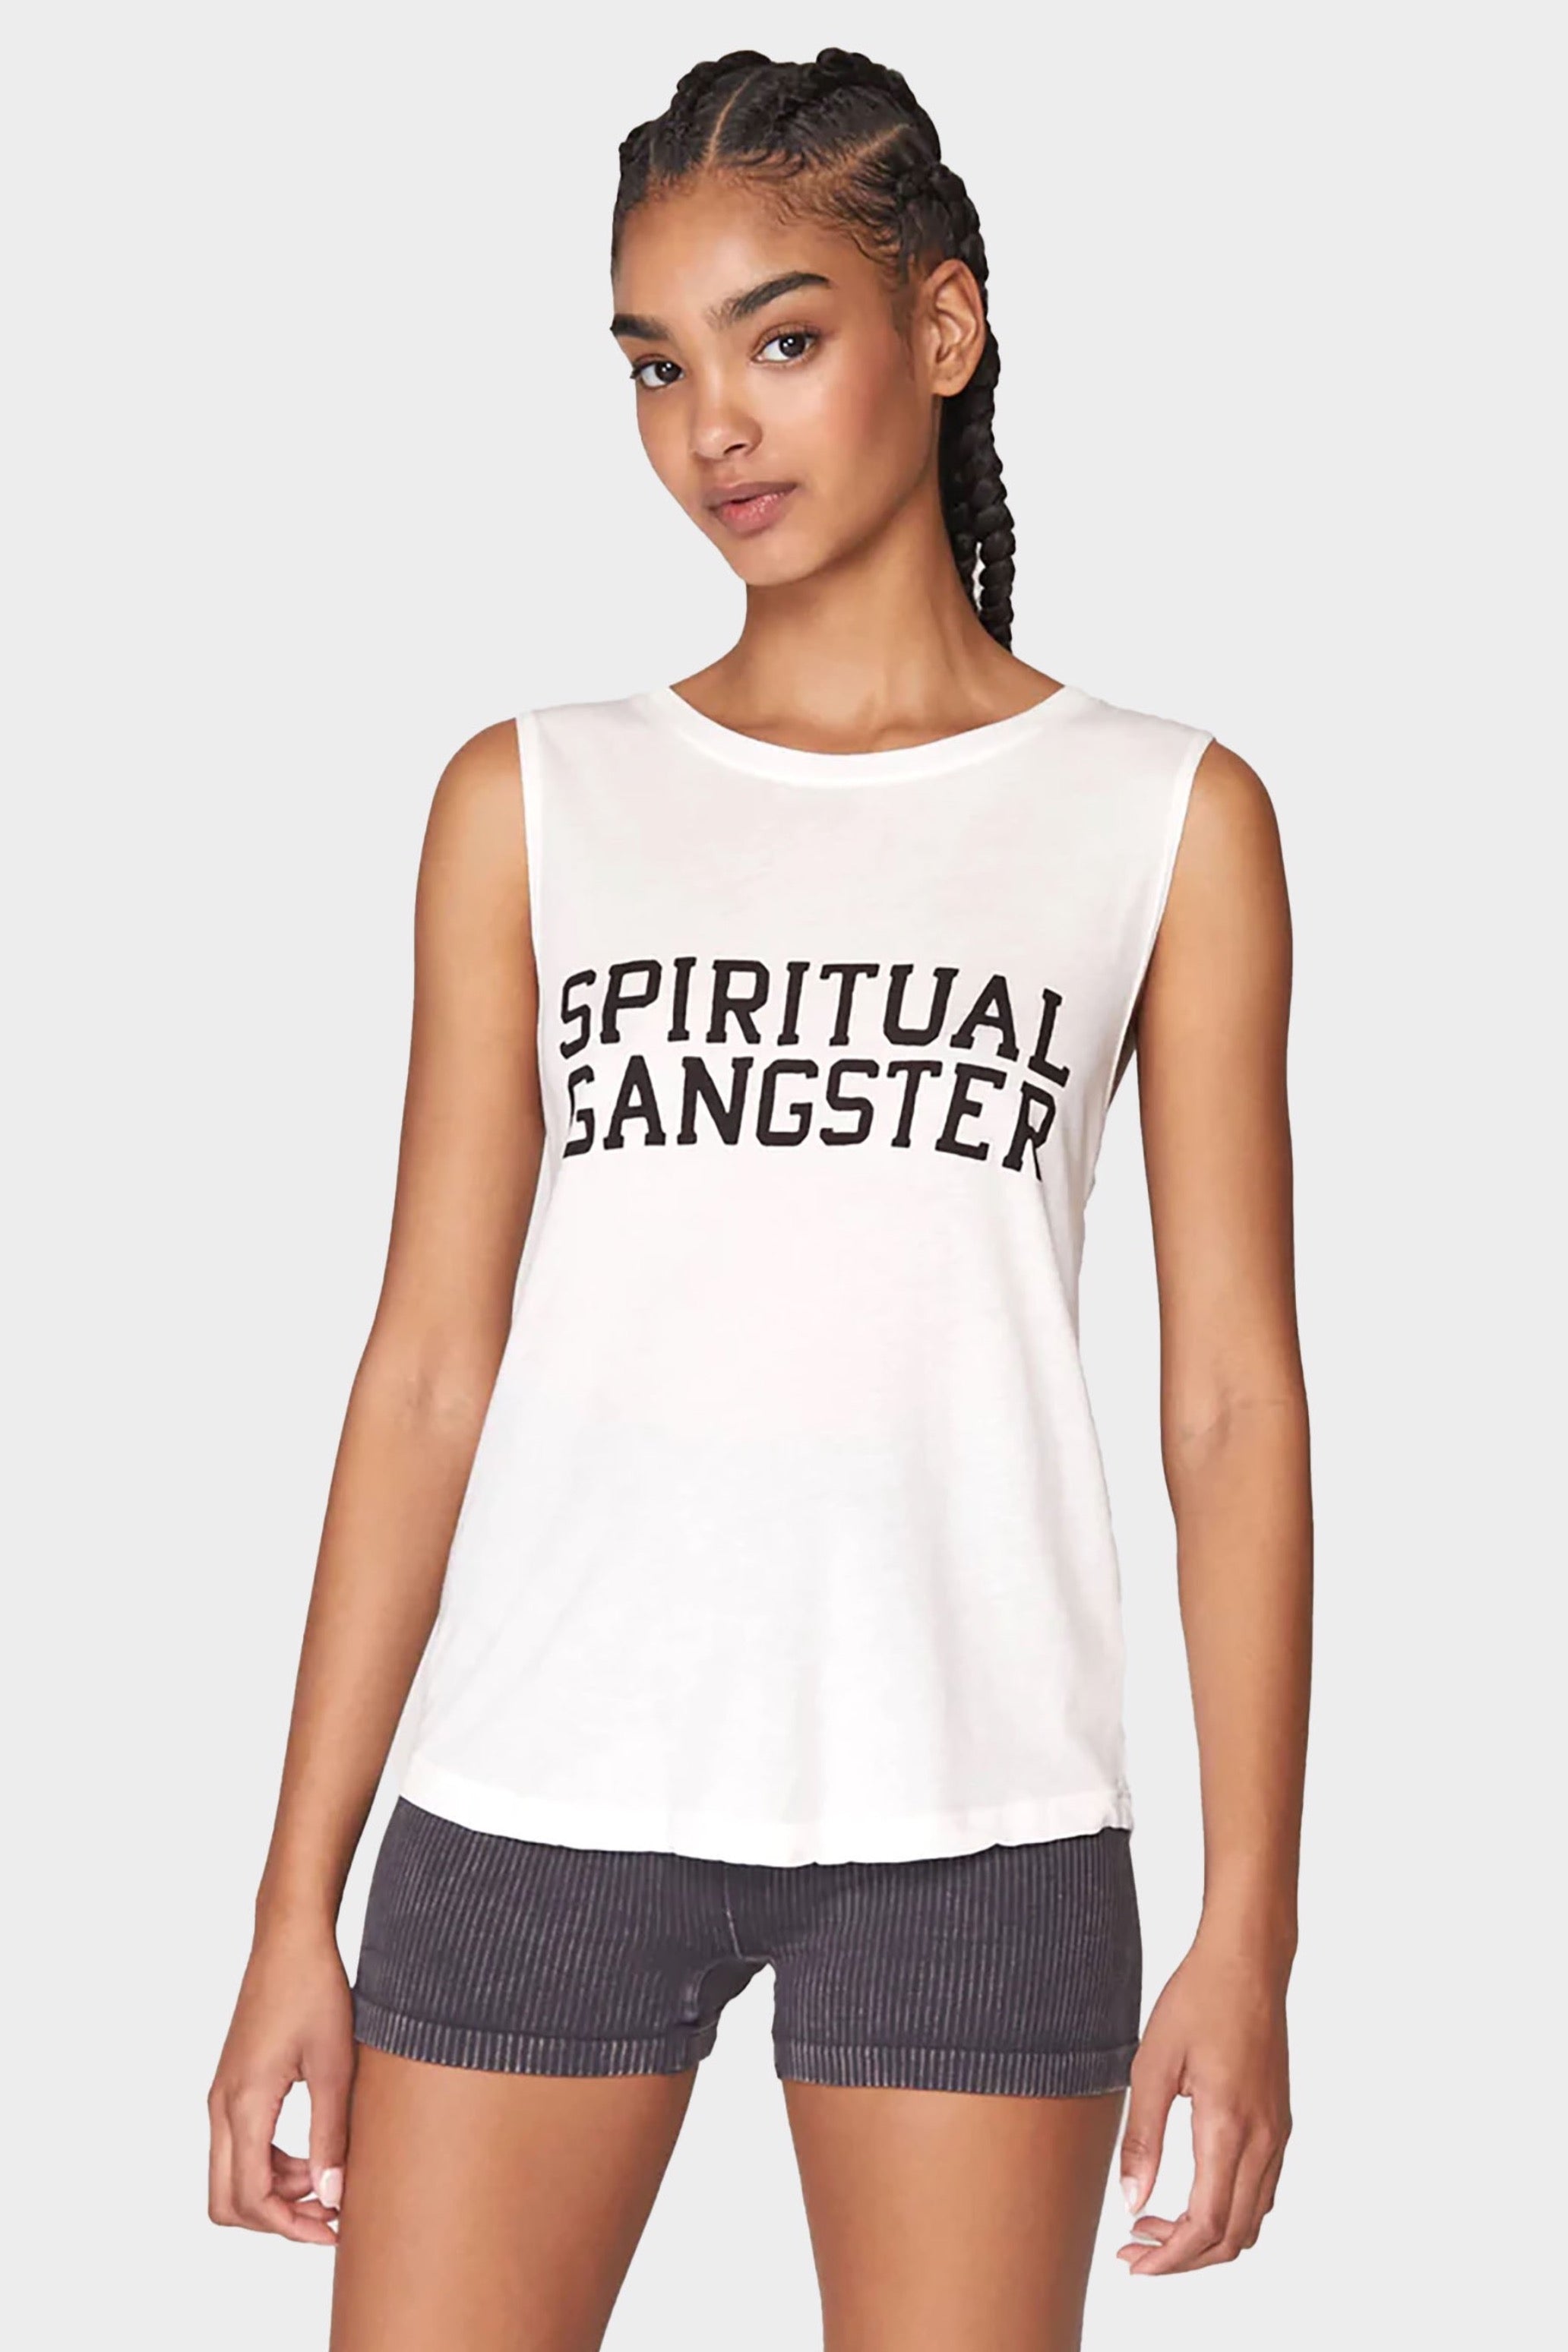 Shop Spiritual Gangster collection for women online – Tribe71